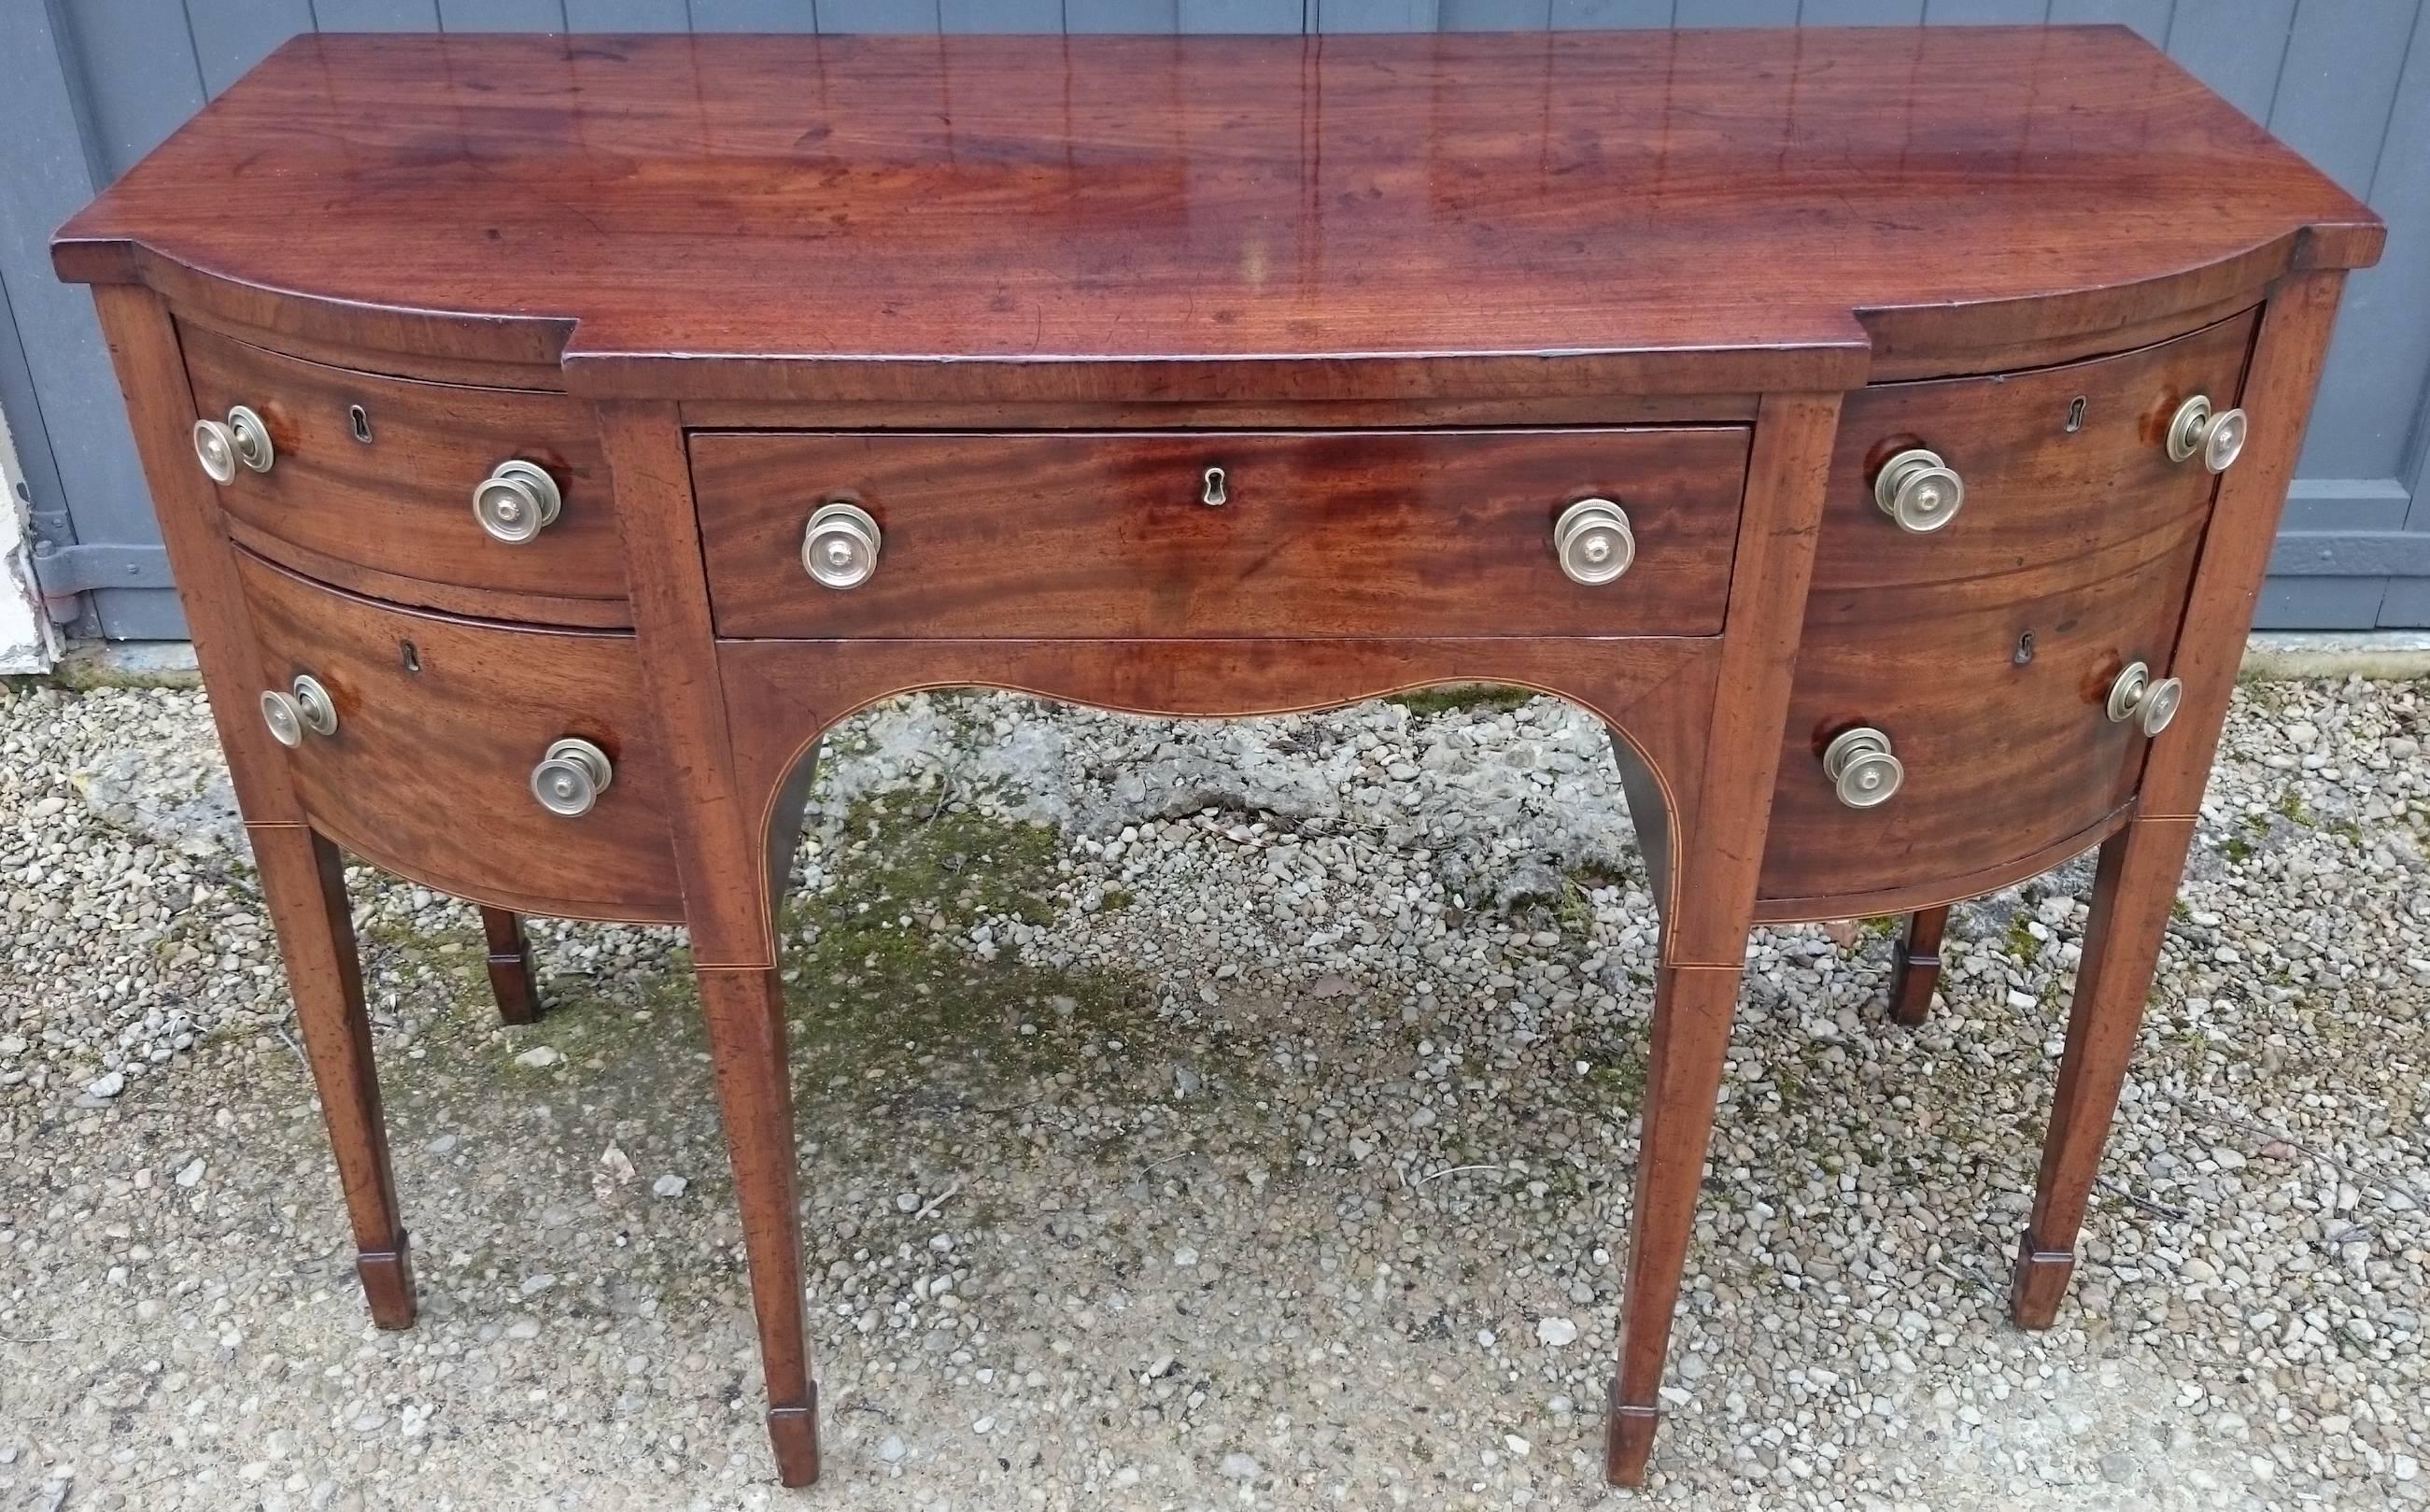 18th century George III period antique sideboard standing on six square taper legs with spade feet. This sideboard is made of a really Fine cut of mahogany with boxwood and ebony stringing. The mahogany has faded to a good pale color while retailing